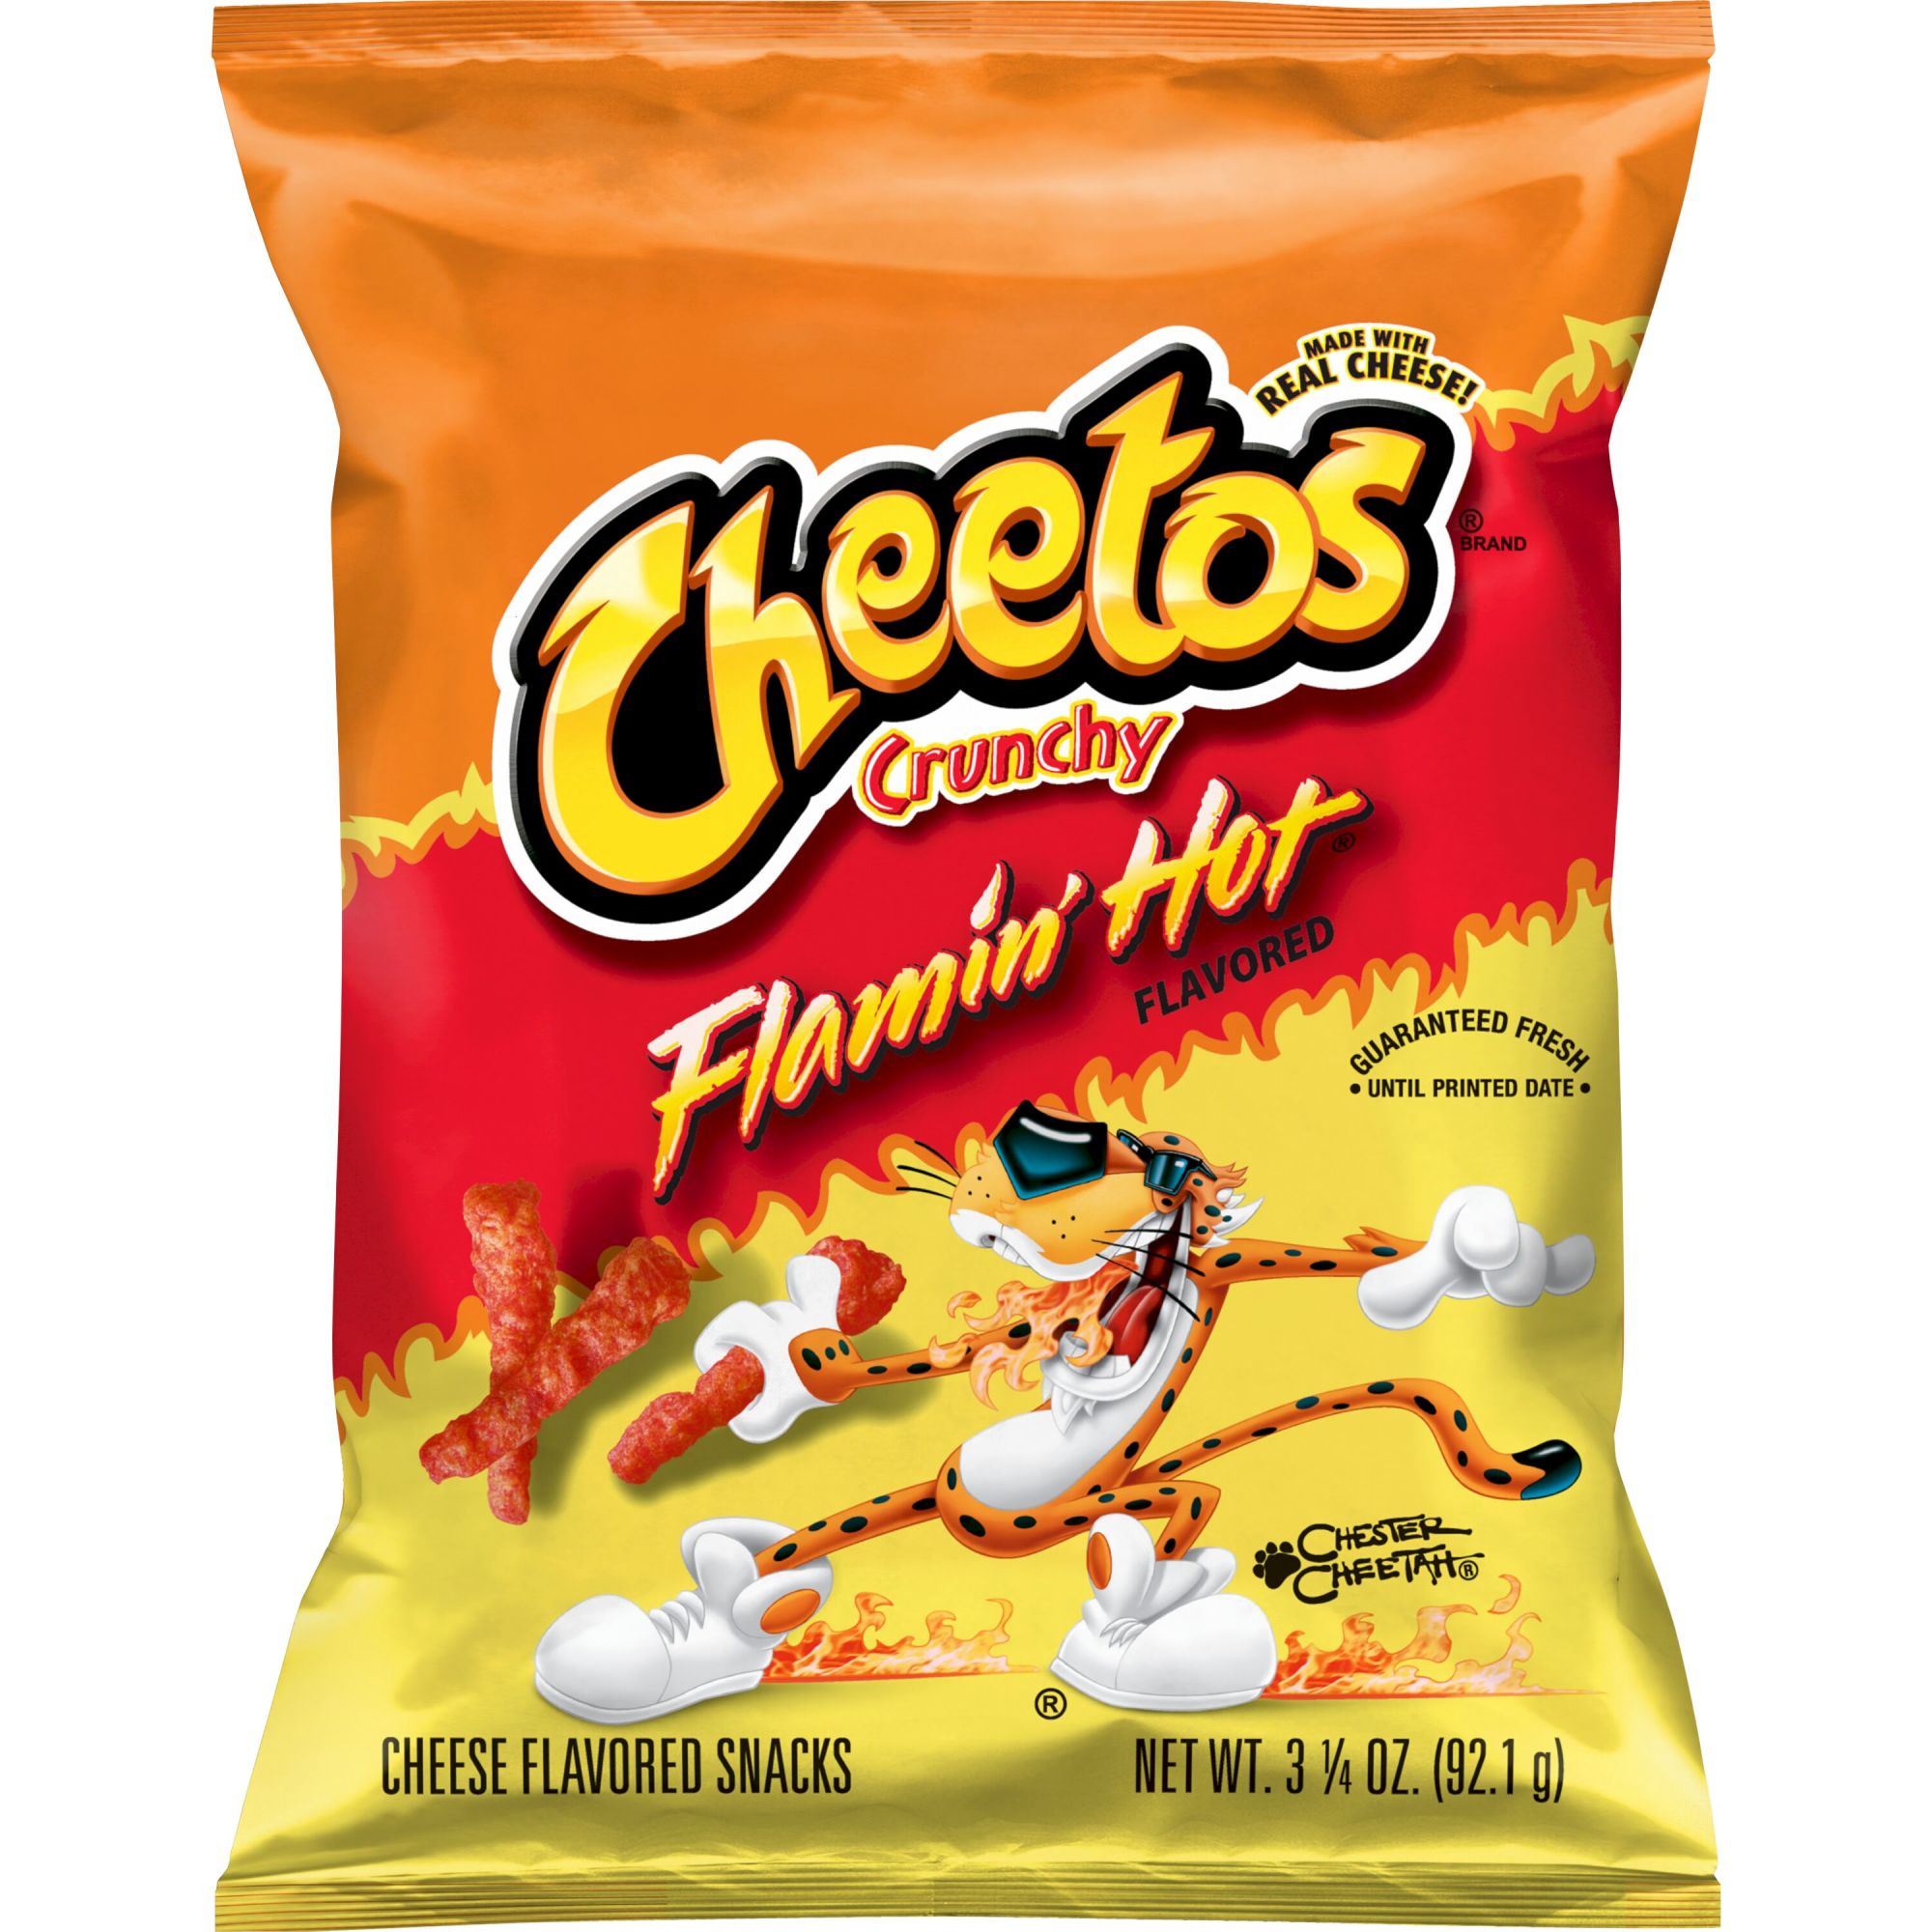 Cheetos Crunchy Cheese Flavored Snacks Flamin' Hot Flavored, 3.25 oz